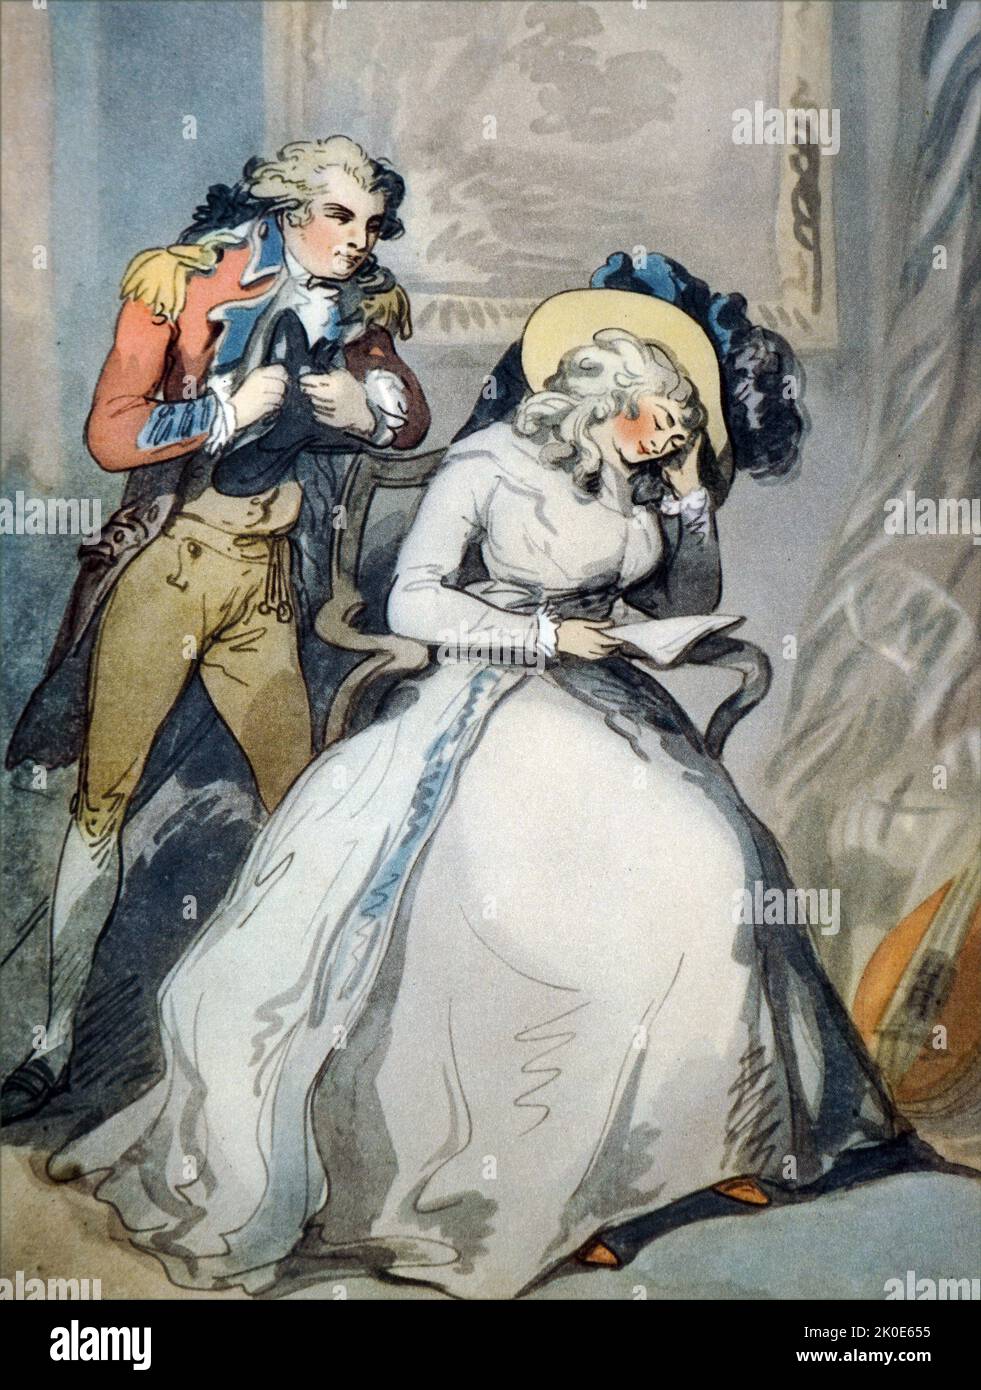 Tom Jones and Sophia Western by Thomas Rowlandson 1792. Thomas Rowlandson (13 July 1757 - 21 April 1827) was an English artist and caricaturist of the Georgian Era, noted for his political satire and social observation. Stock Photo